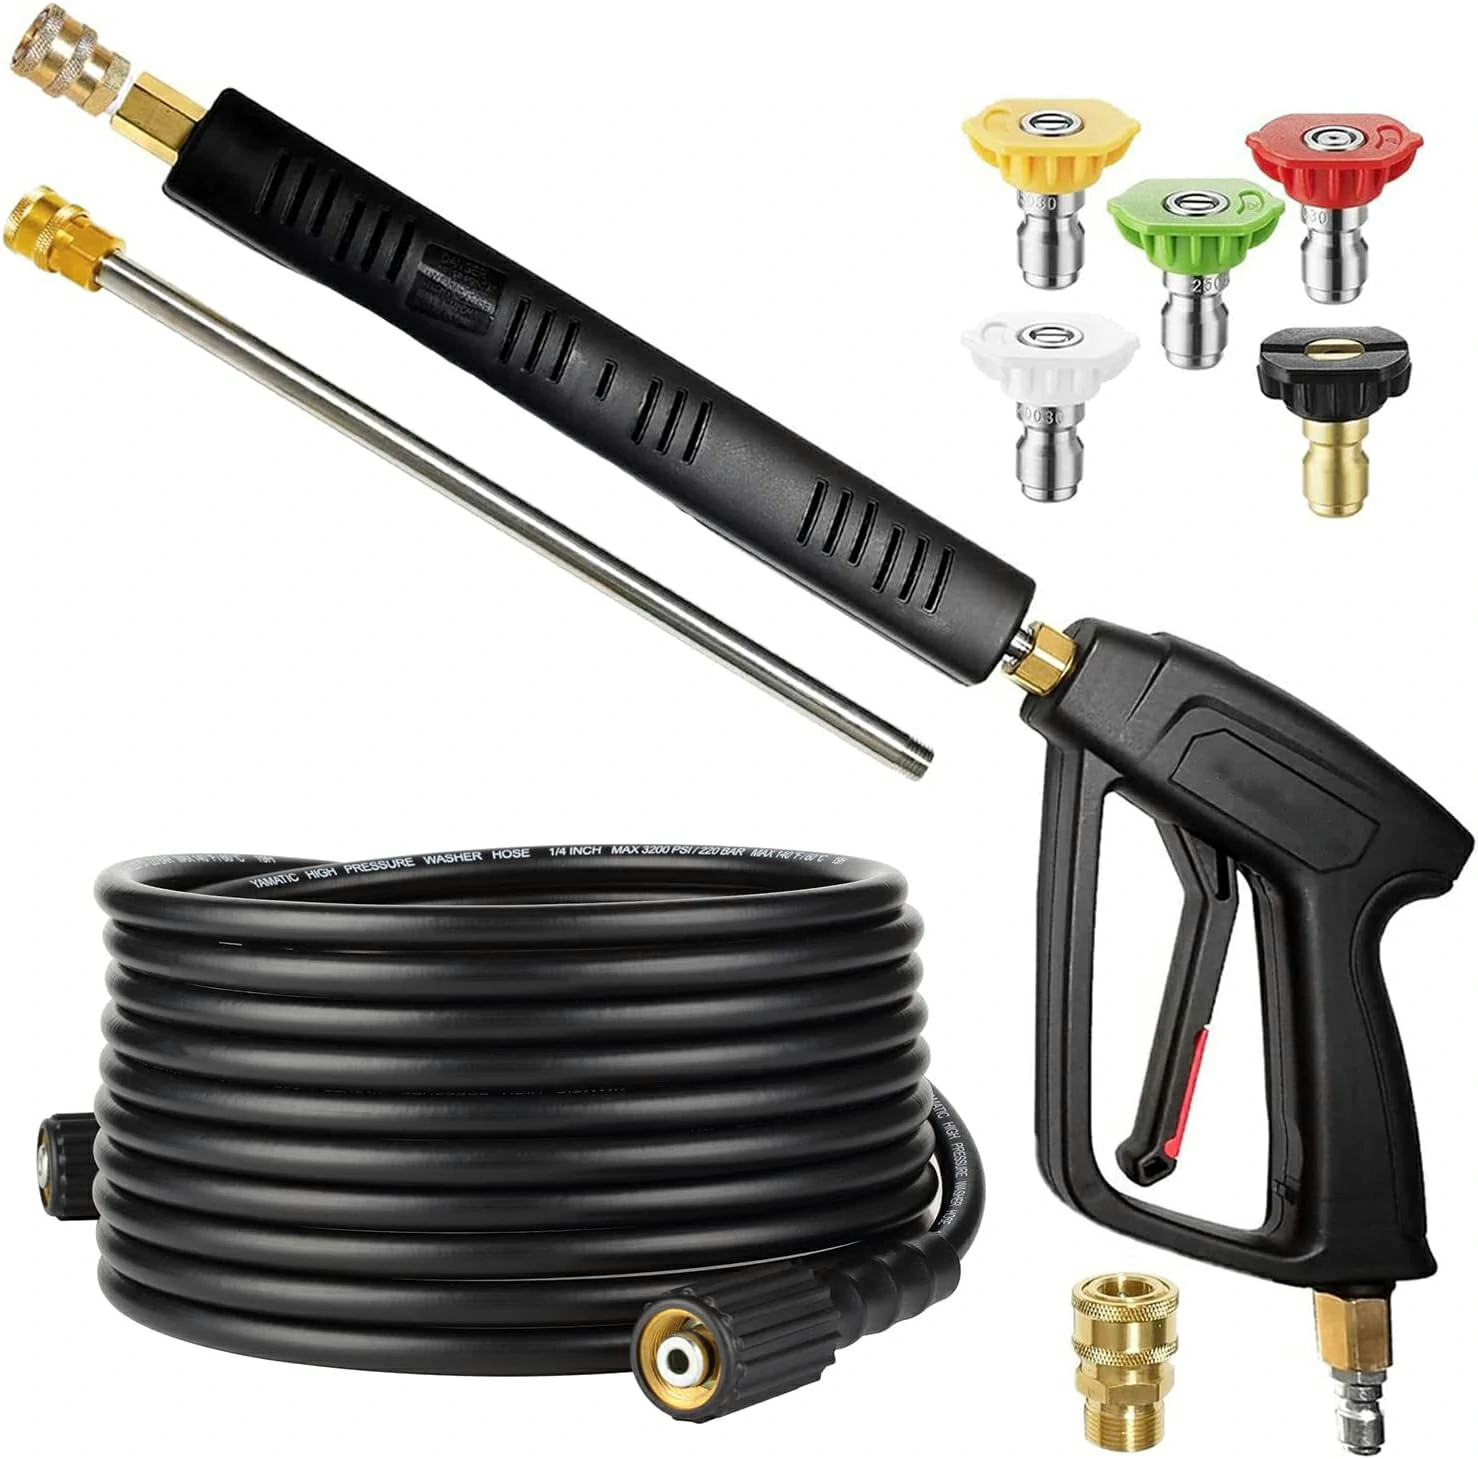 EVEAGE Brass Pressure Washer Gun and Hose Kit, 25 FT Power Washer Hose and Extension Wand